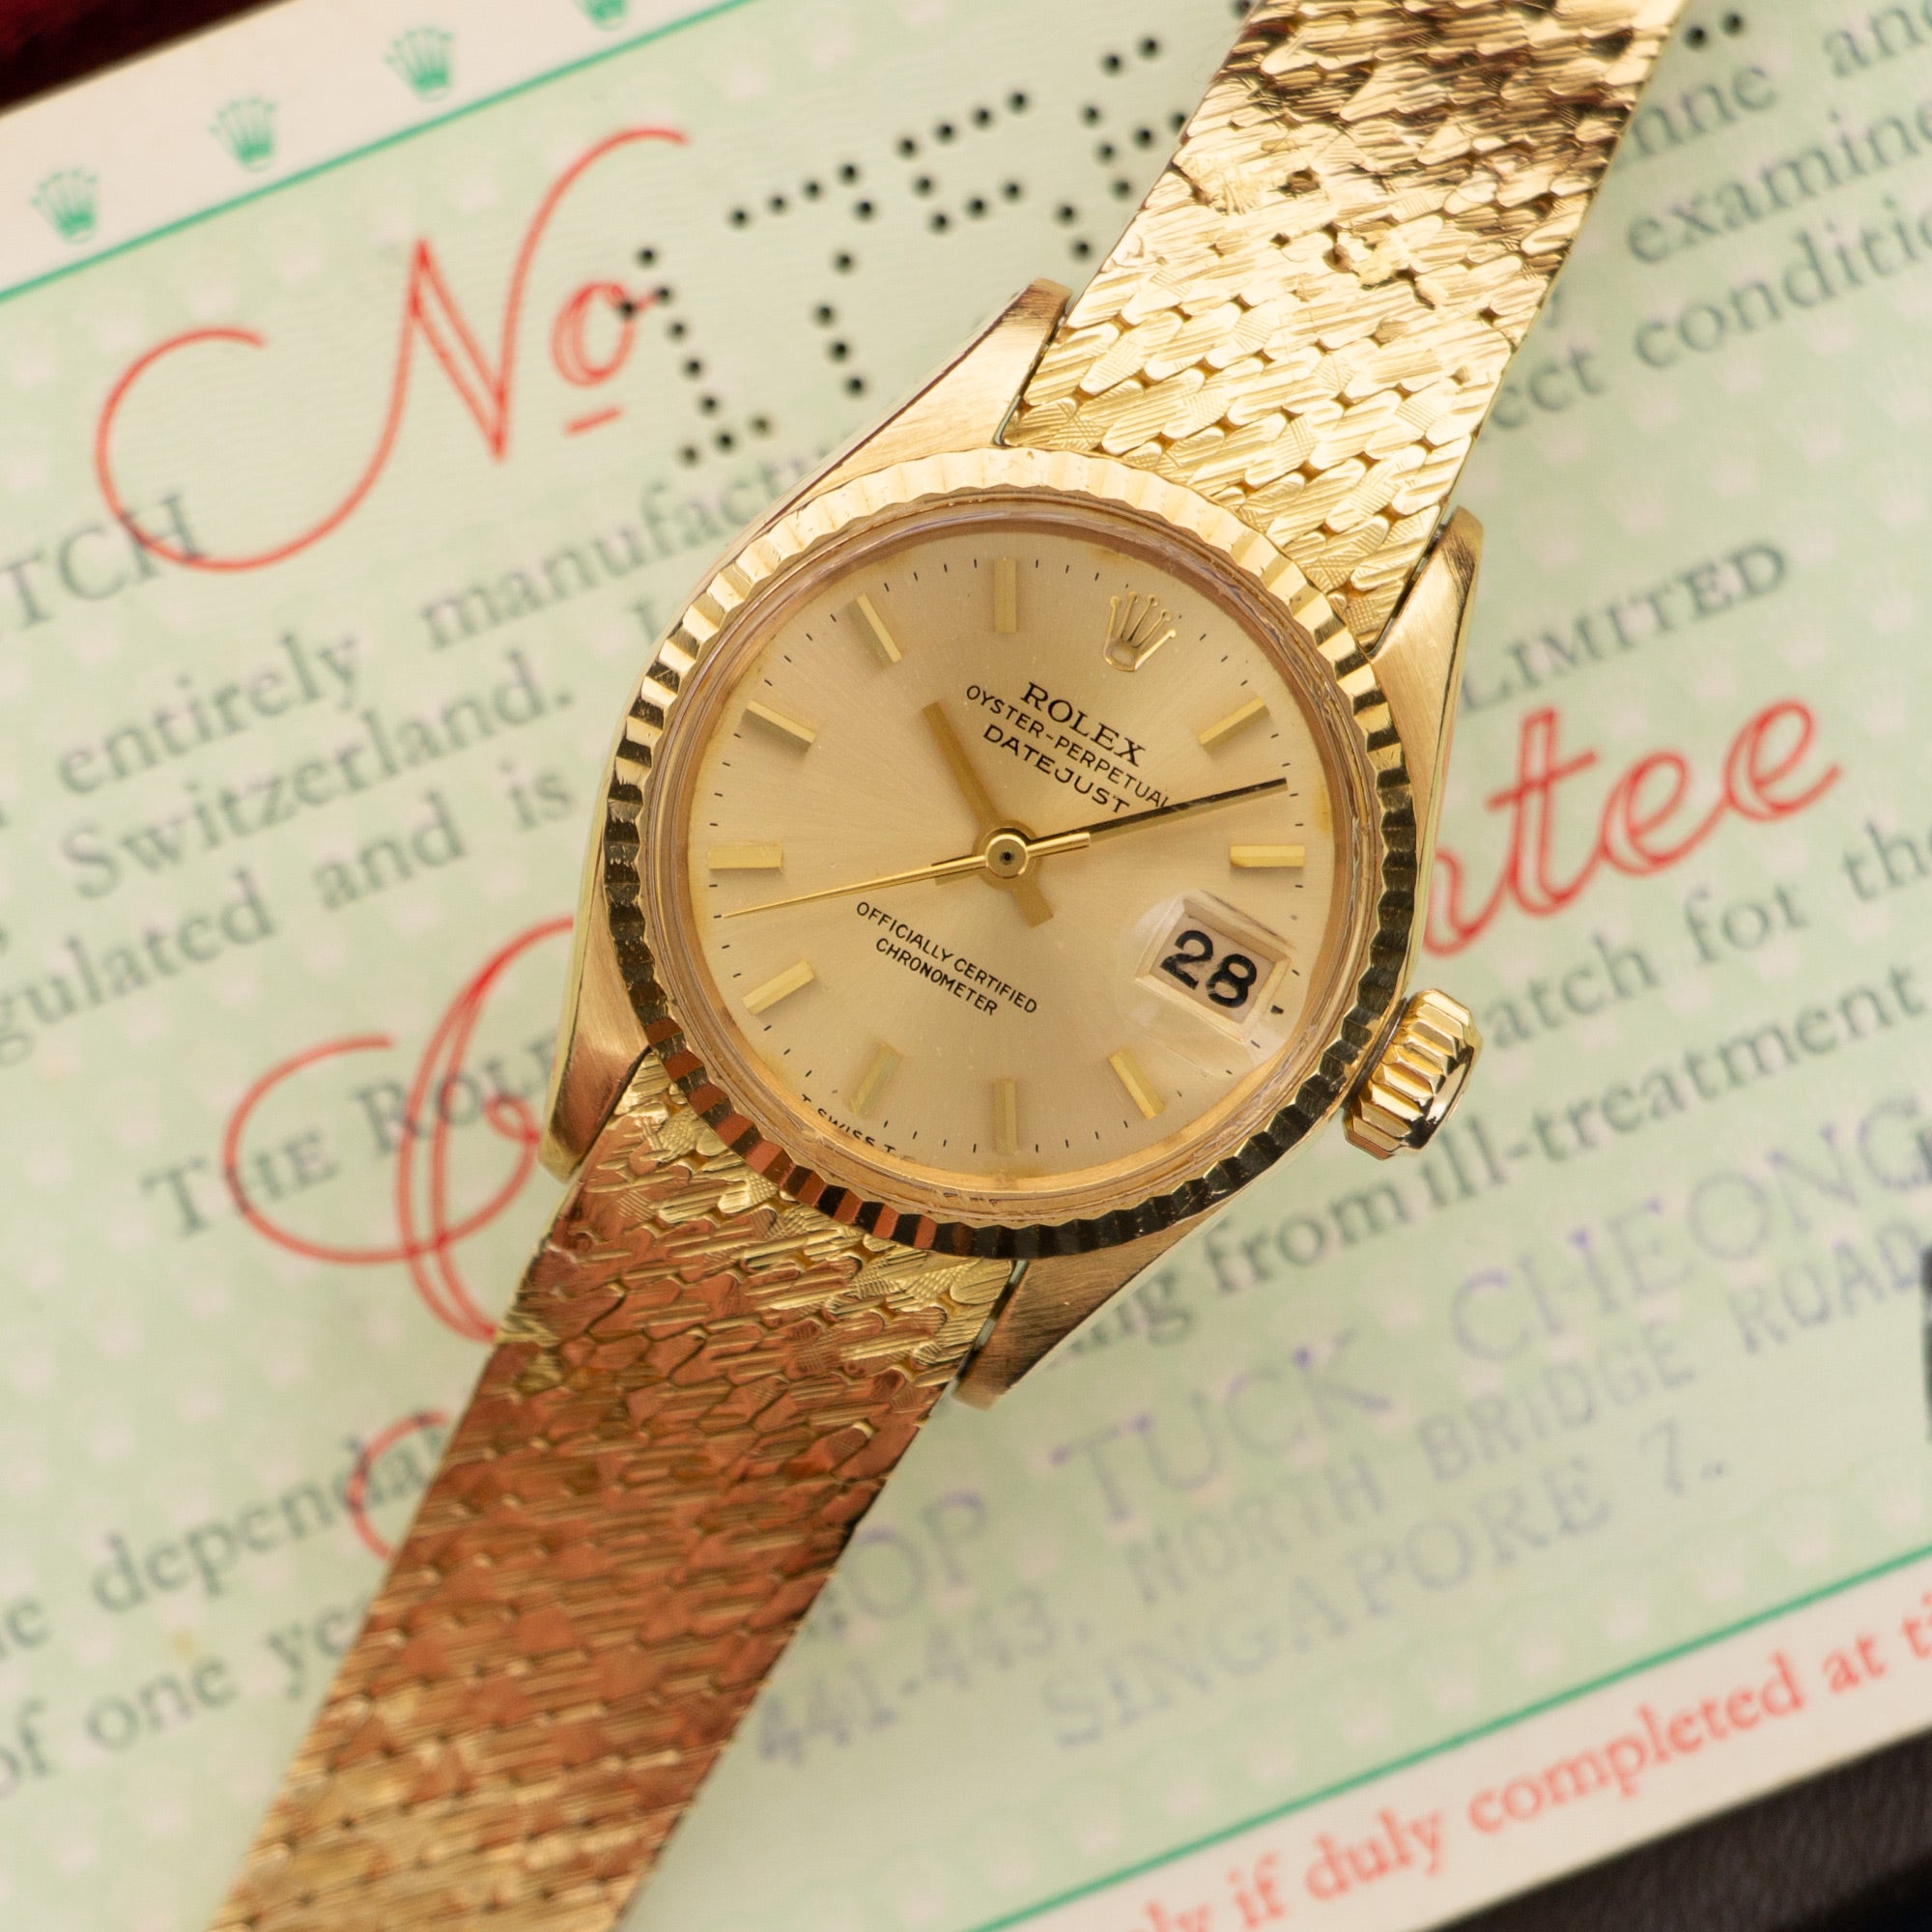 Rolex - Rolex Yellow Gold Datejust Watch Ref. 6517 with Original Warranty Papers - The Keystone Watches